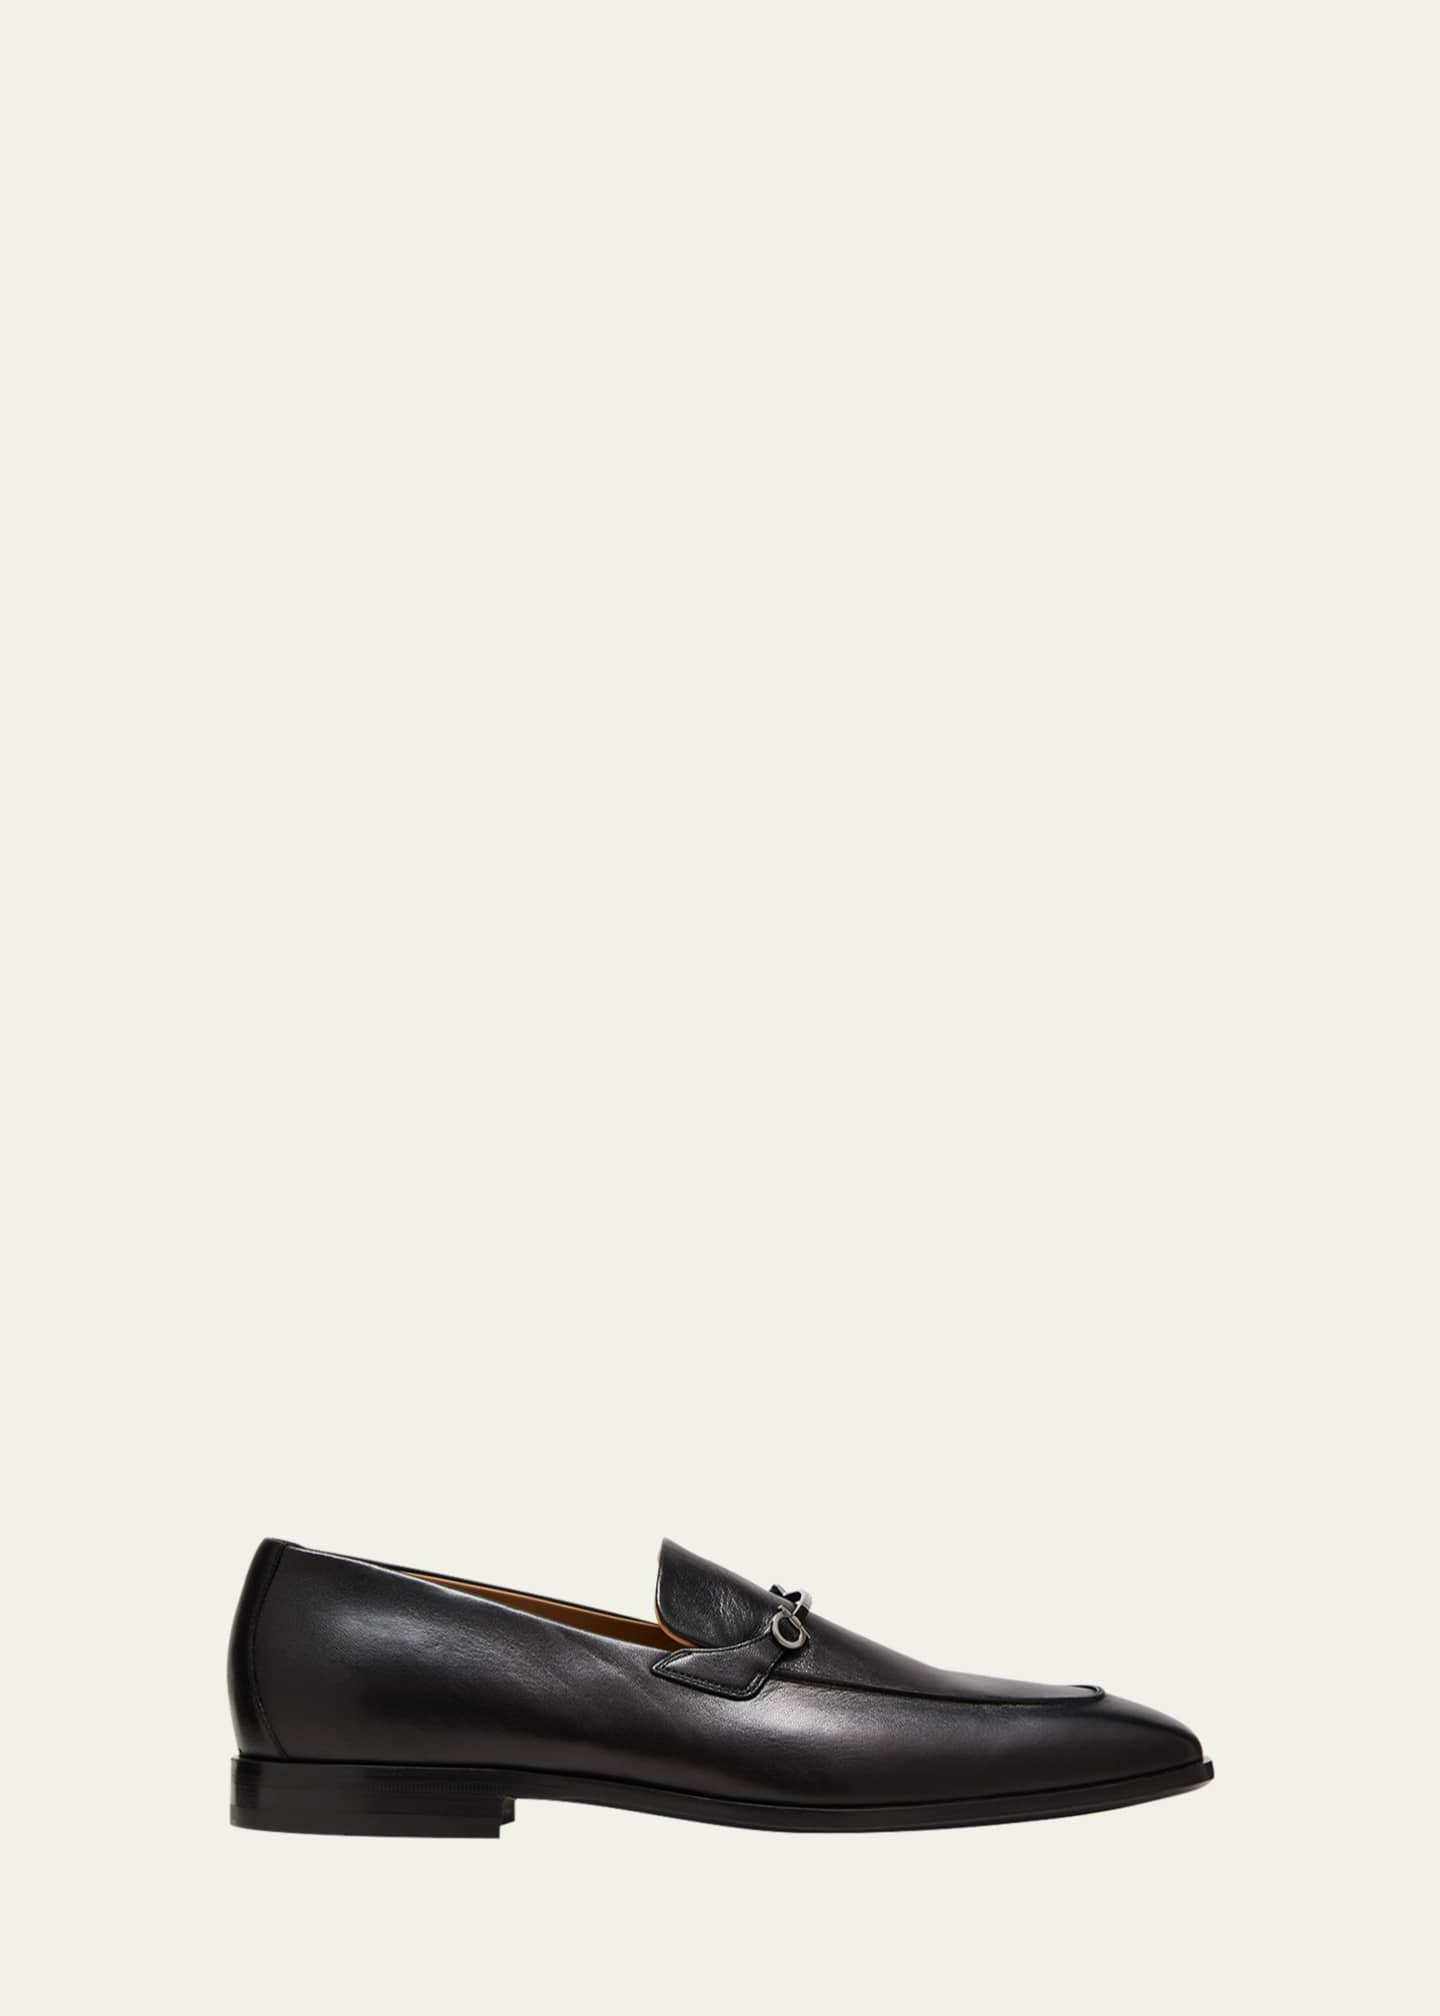 Gucci Men's Lace-Up Leather Loafer - Black - Loafers